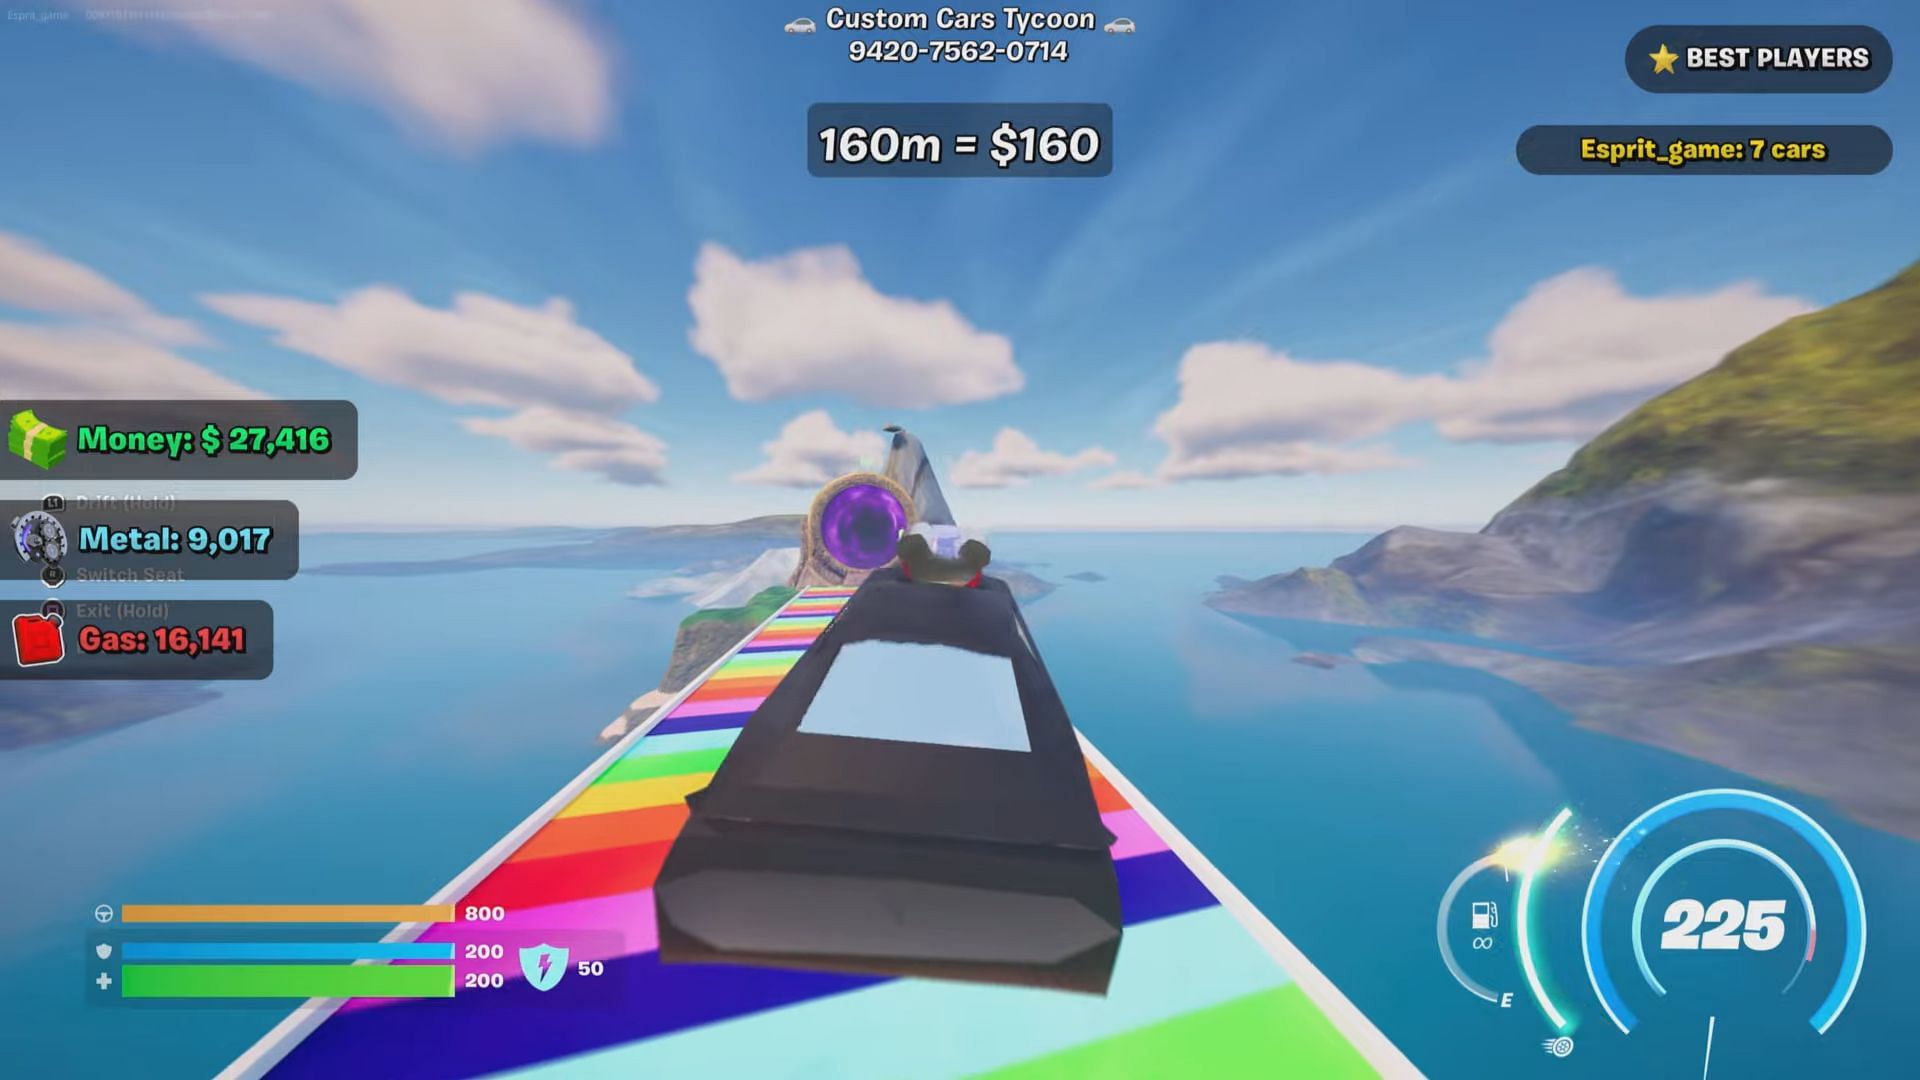 Players can try jumping to the portal with each vehicle they unlock (Image via ESPIRITGAME on YouTube)